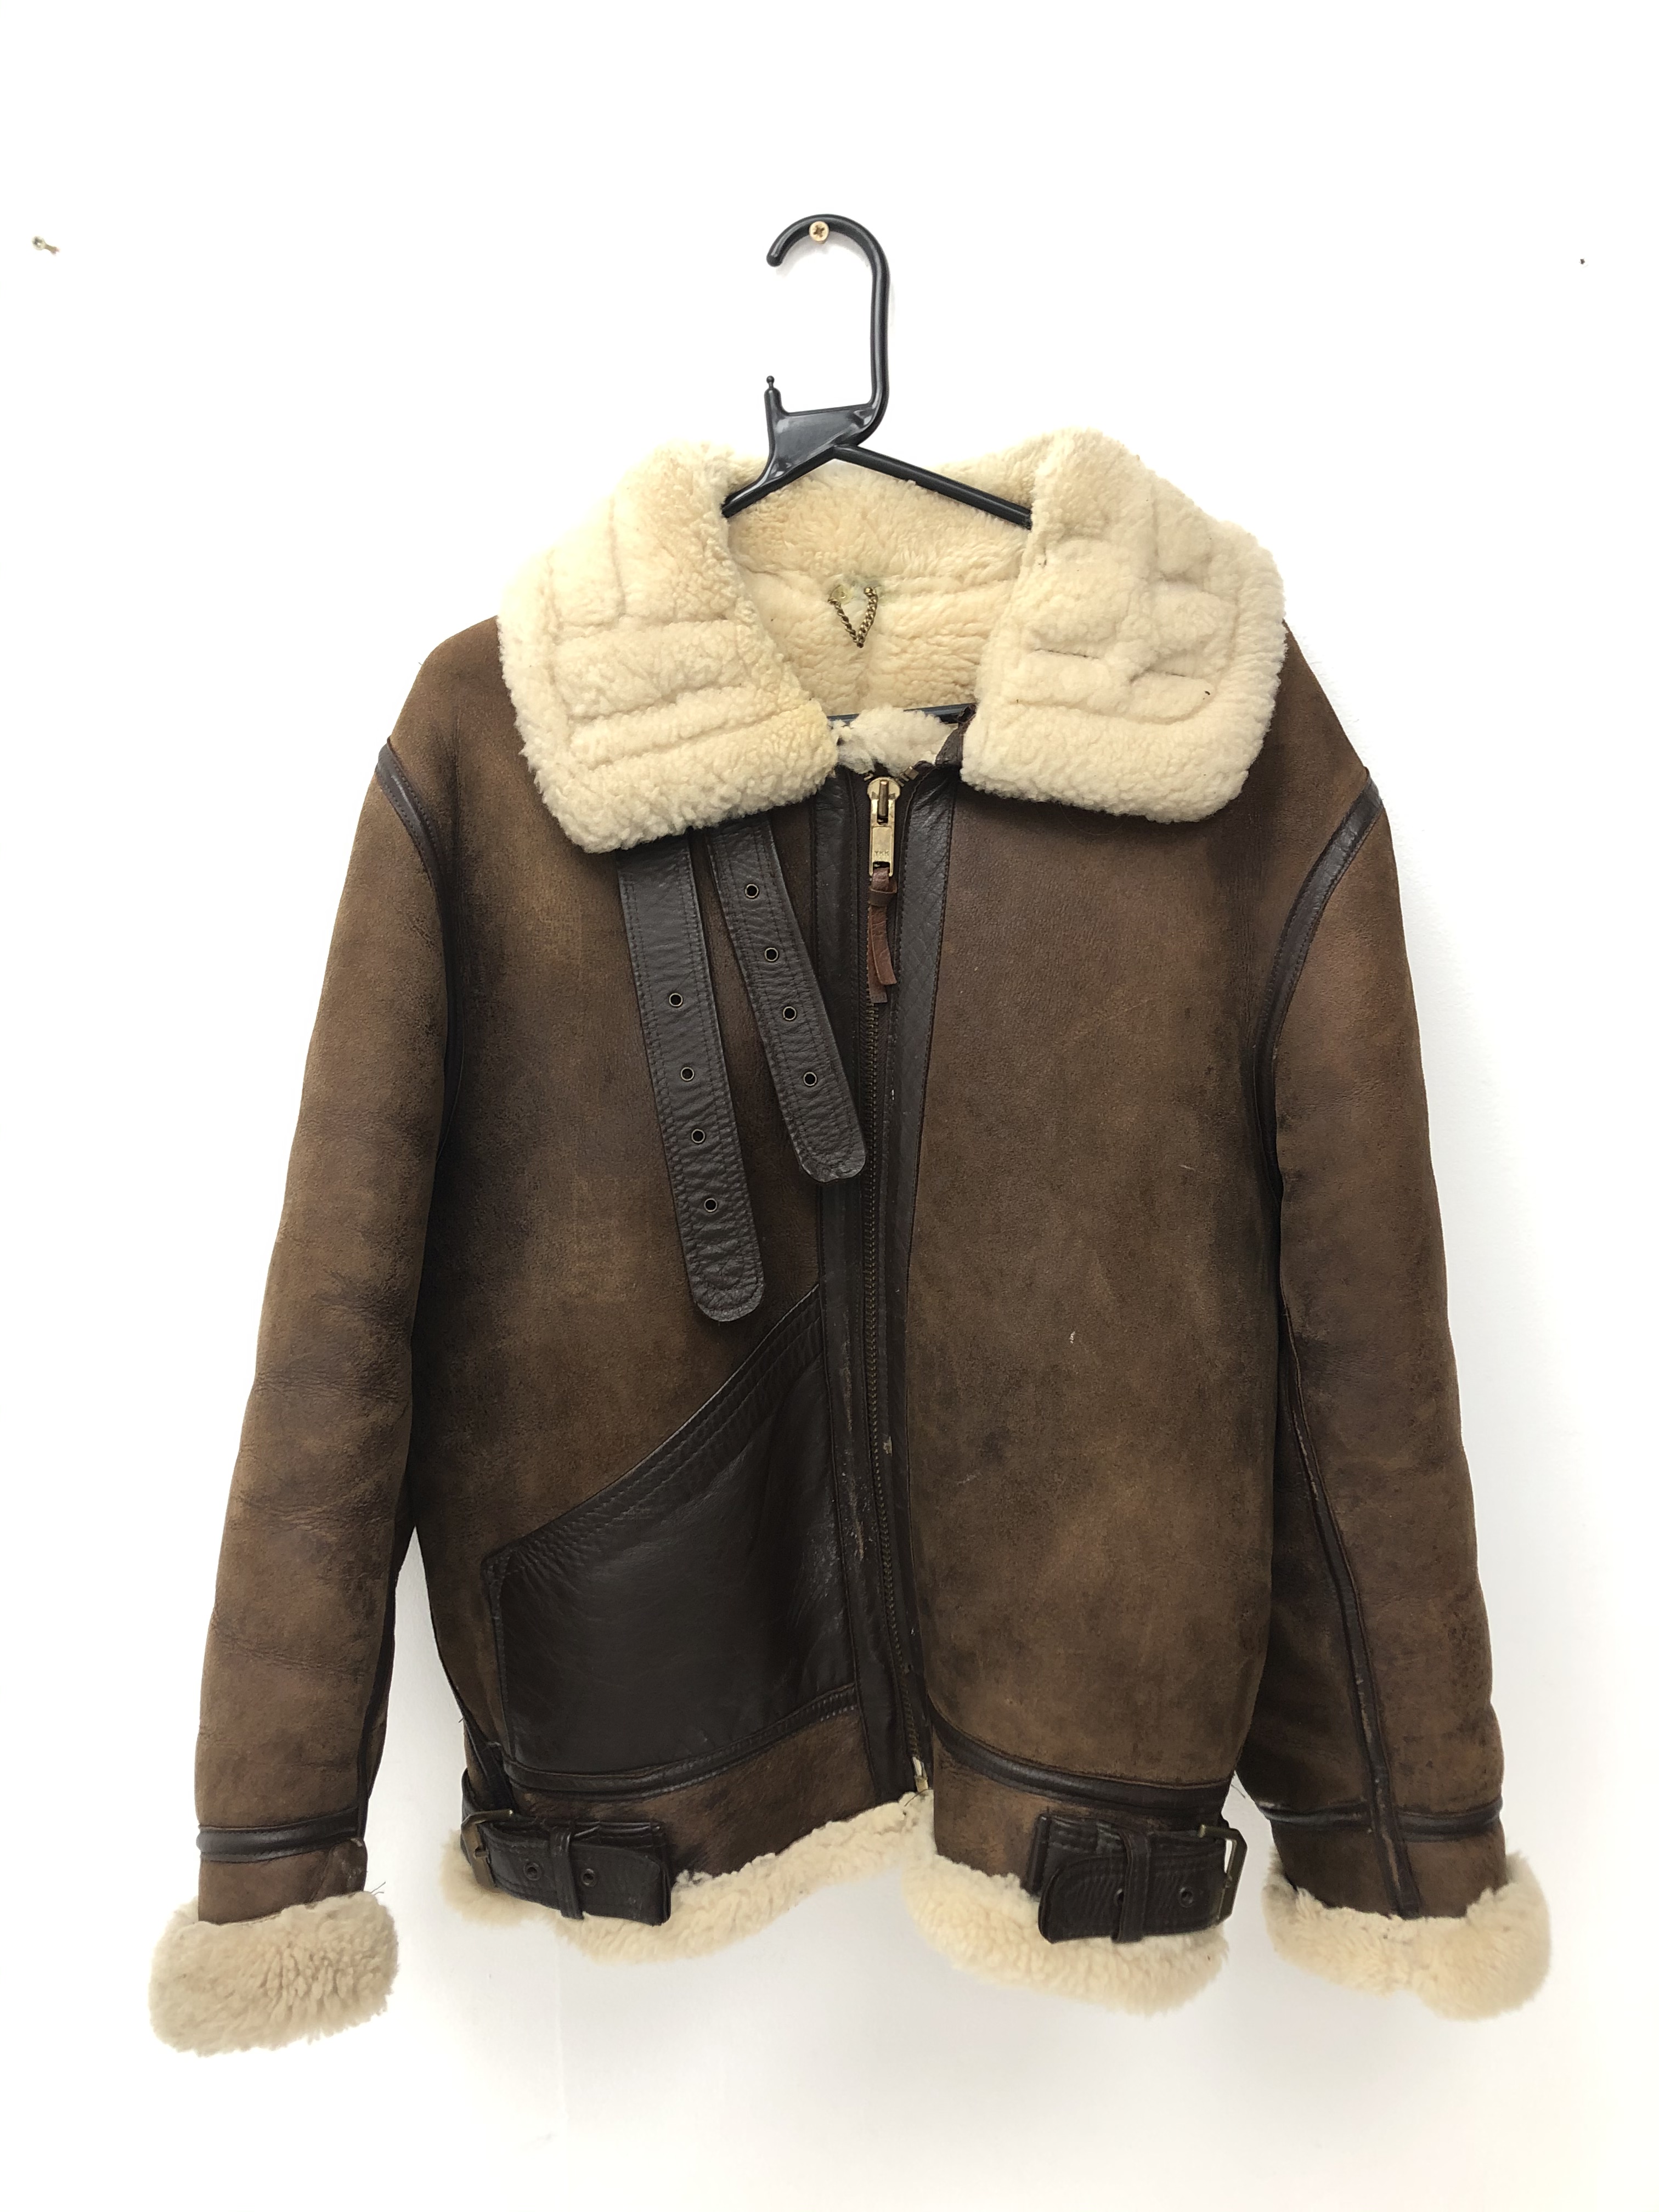 US Air Force style brown leather sheepskin lined flying type jacket,